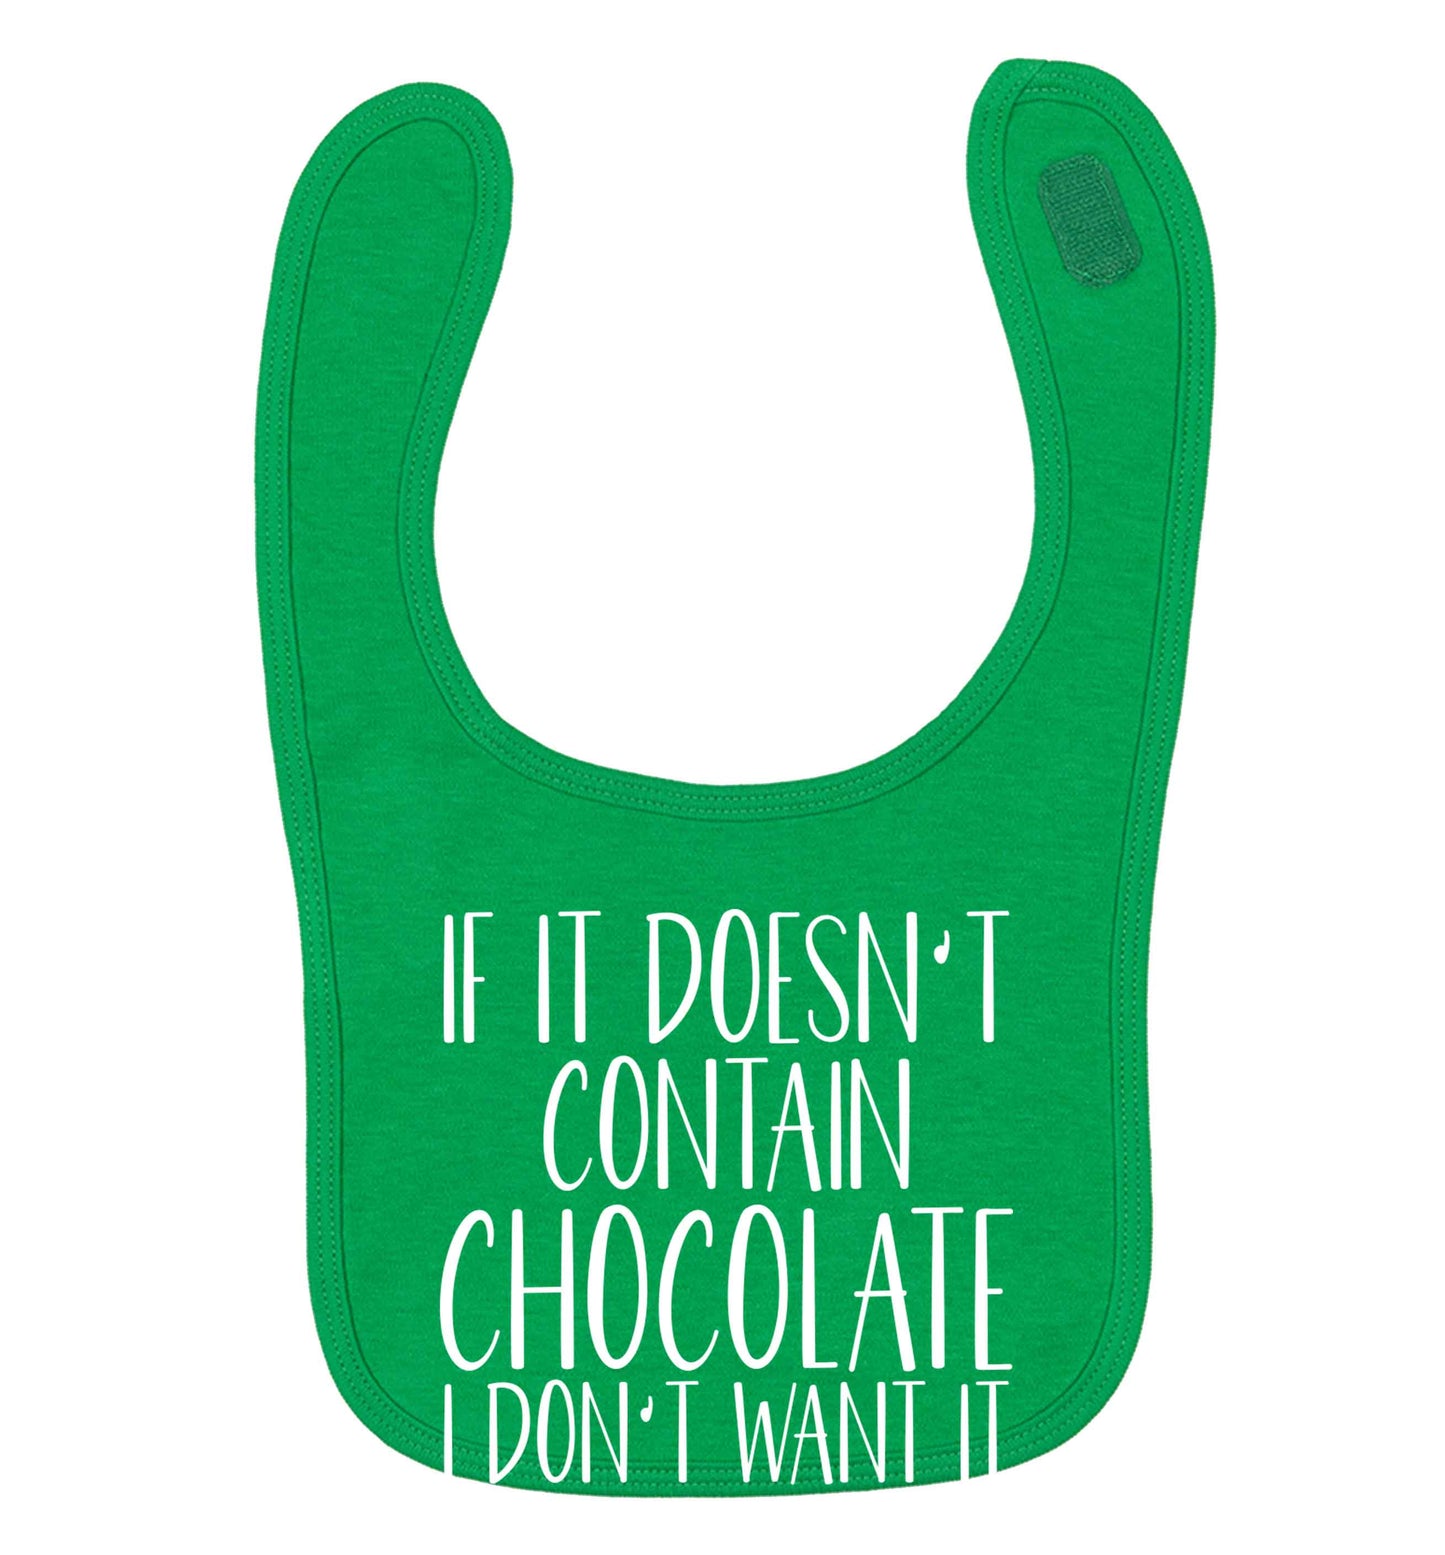 If it doesn't contain chocolate I don't want it green baby bib